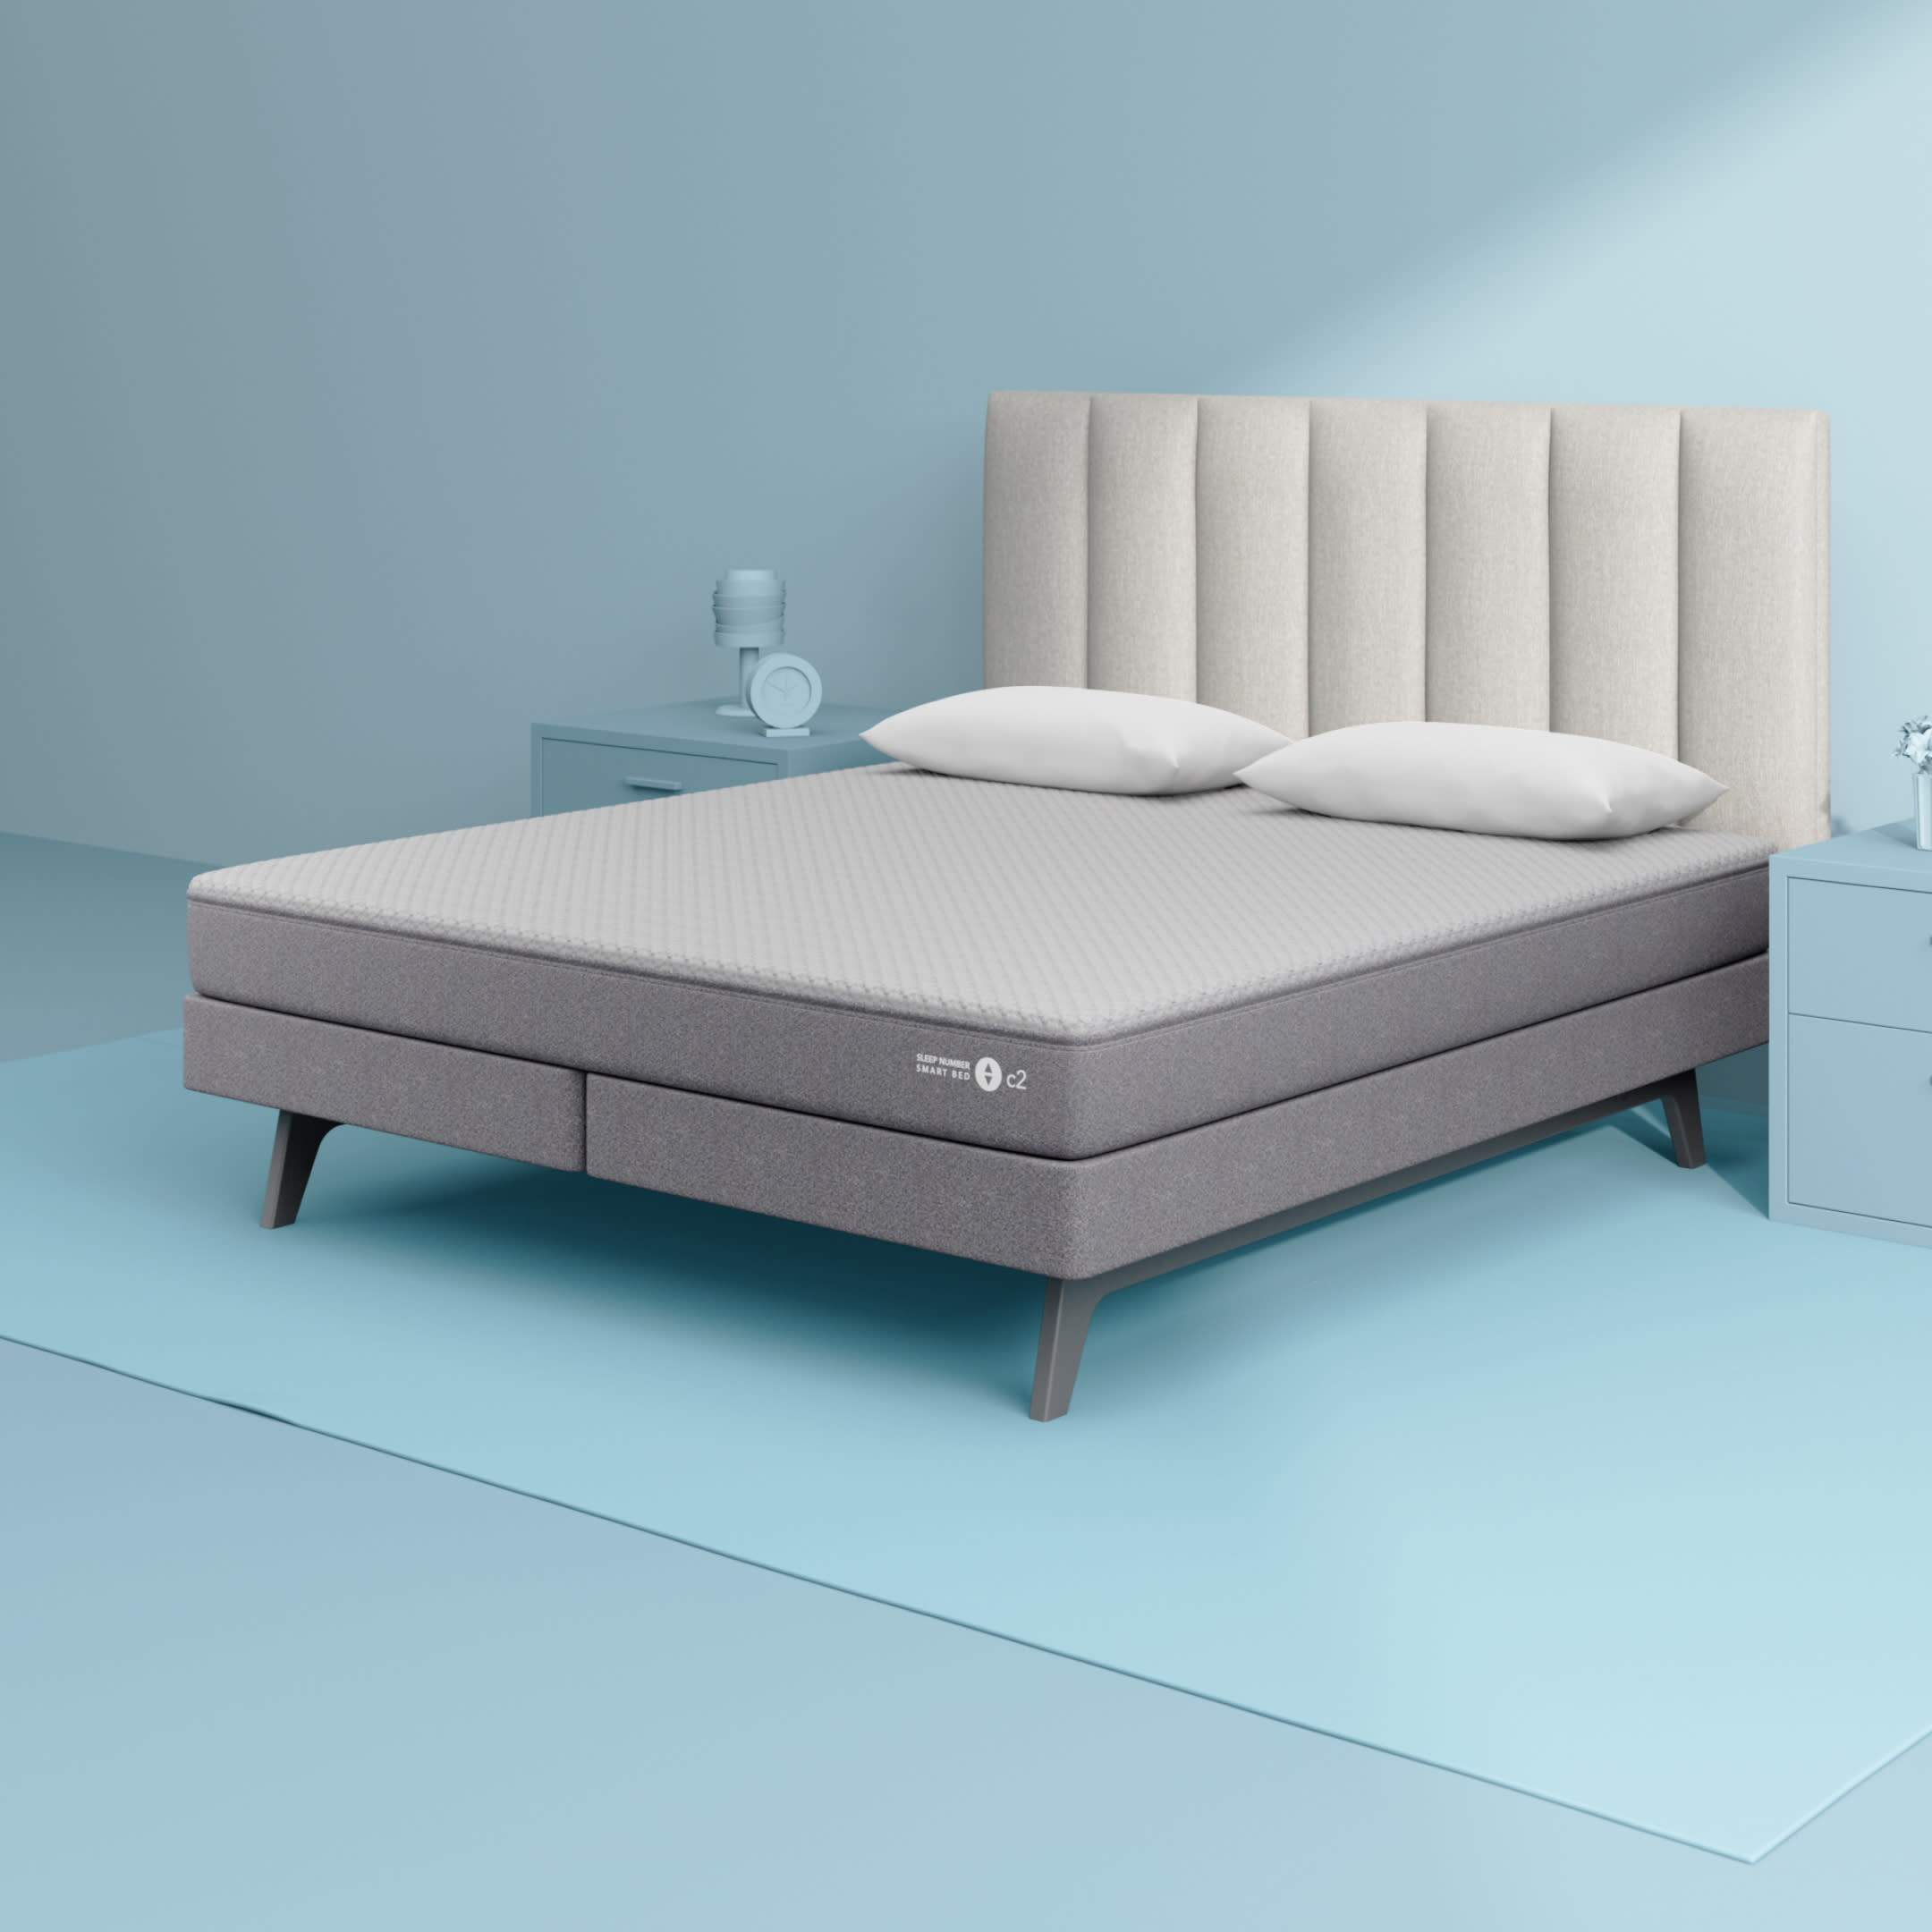 Mattress Size Chart and Bed Dimensions Guide 2023